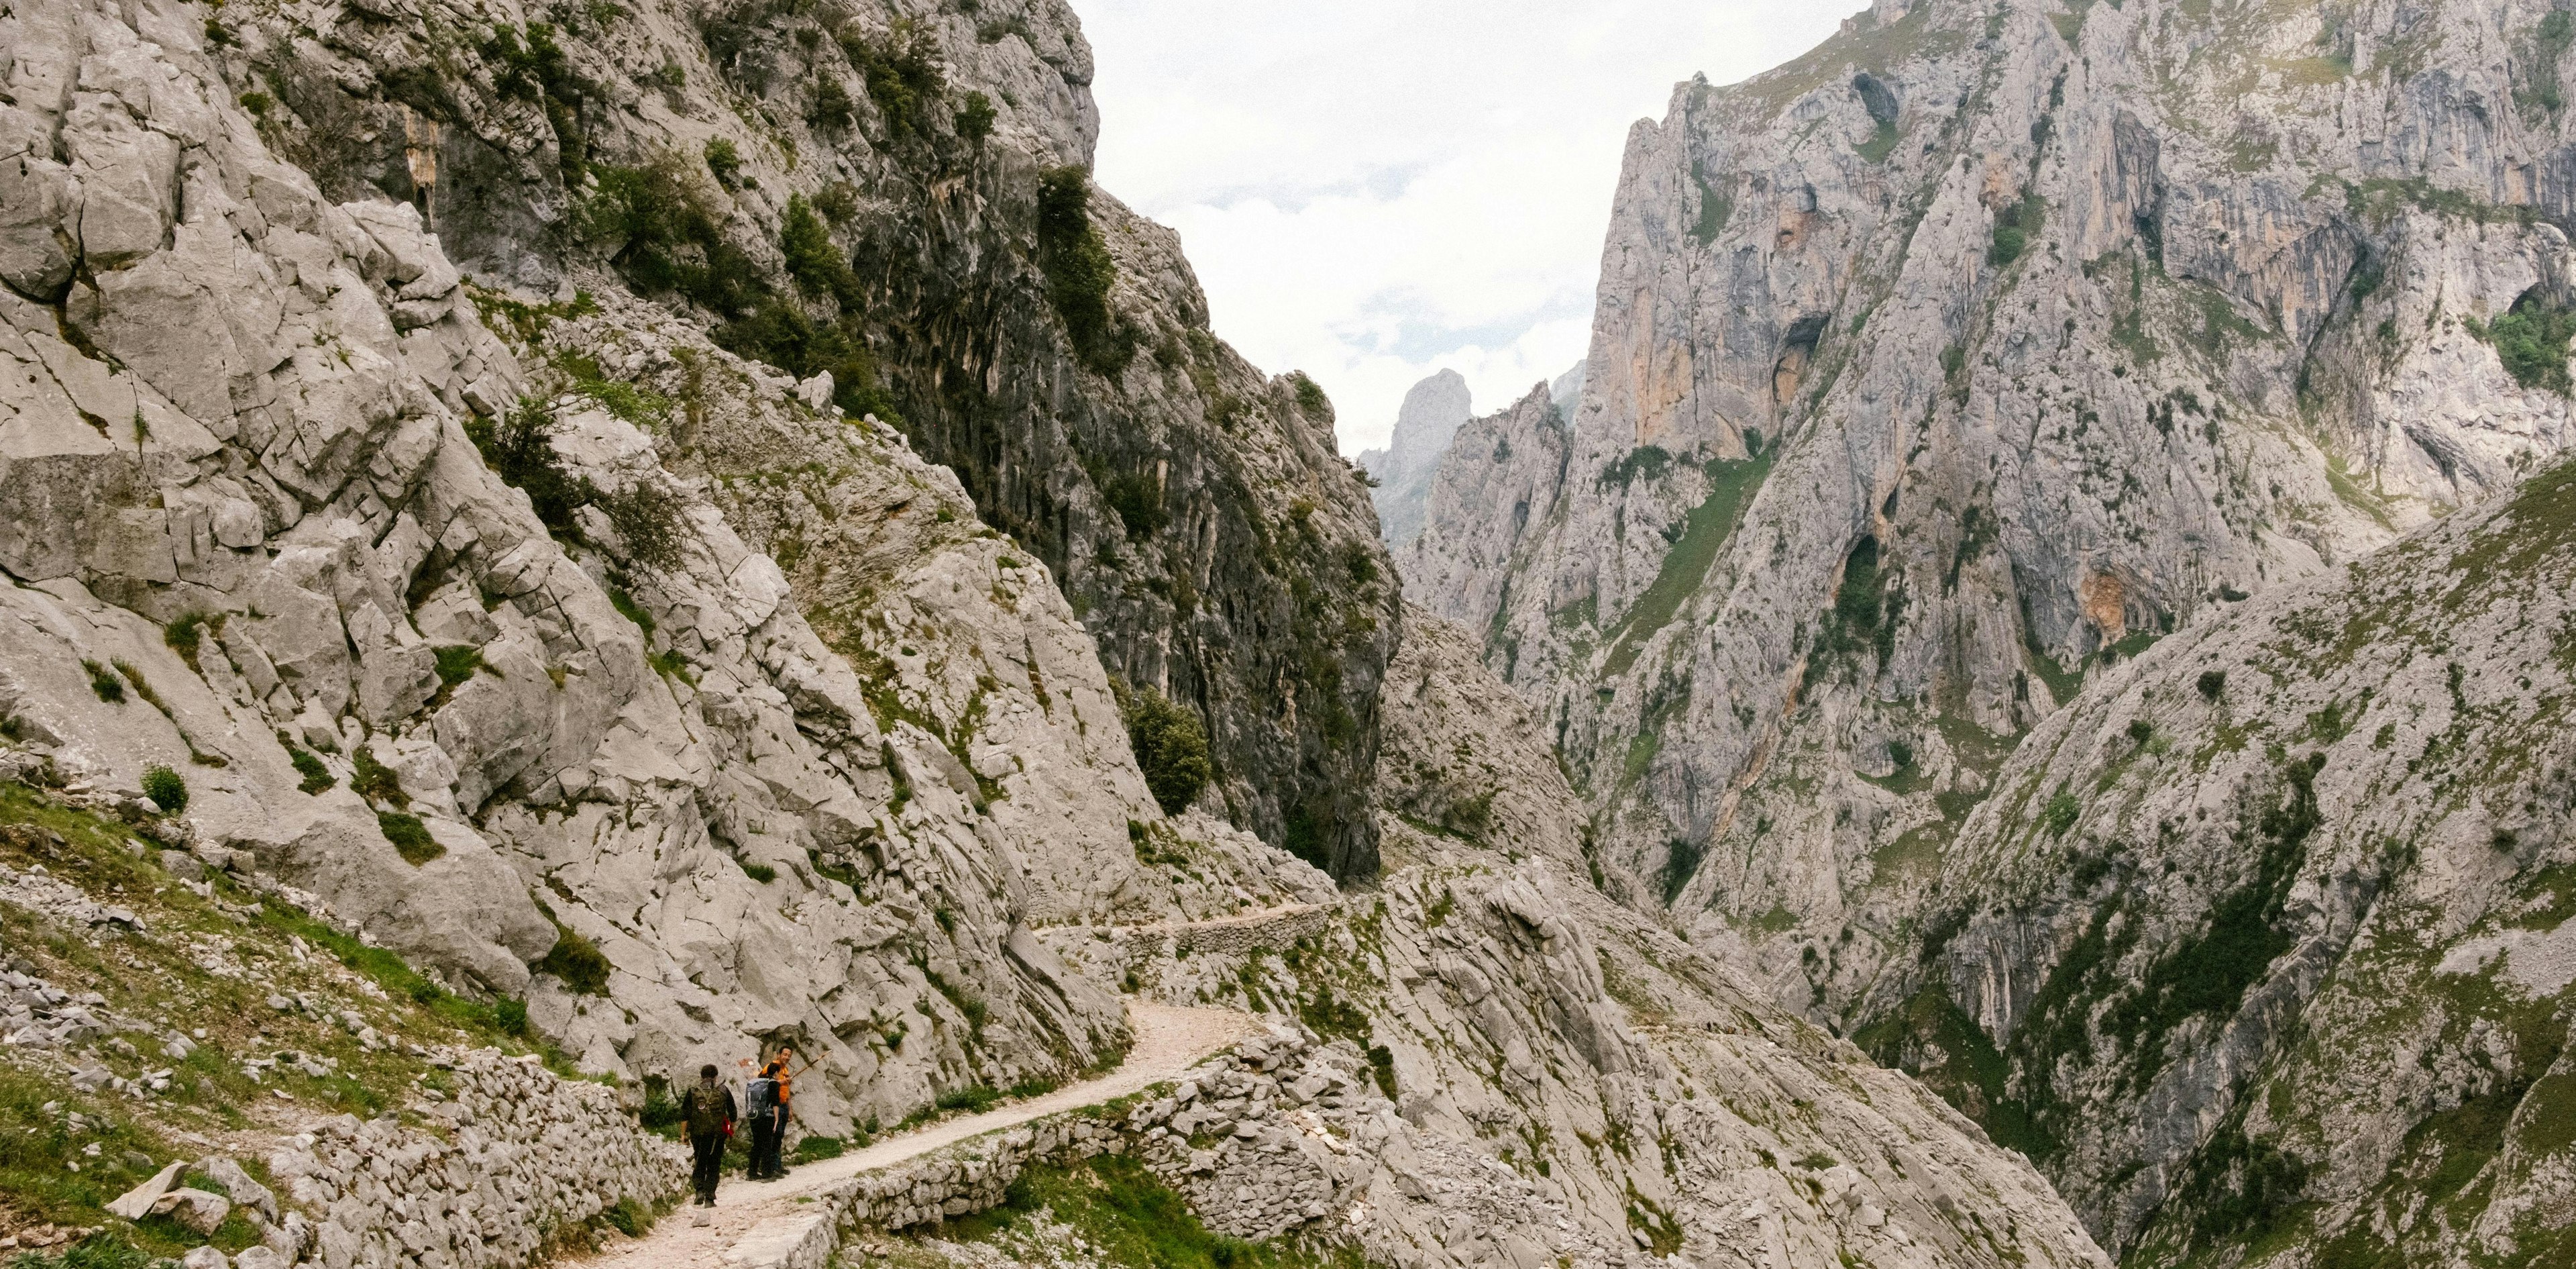 Hiking along the Ruta del Cares is a popular way to see the Picos de Europa.